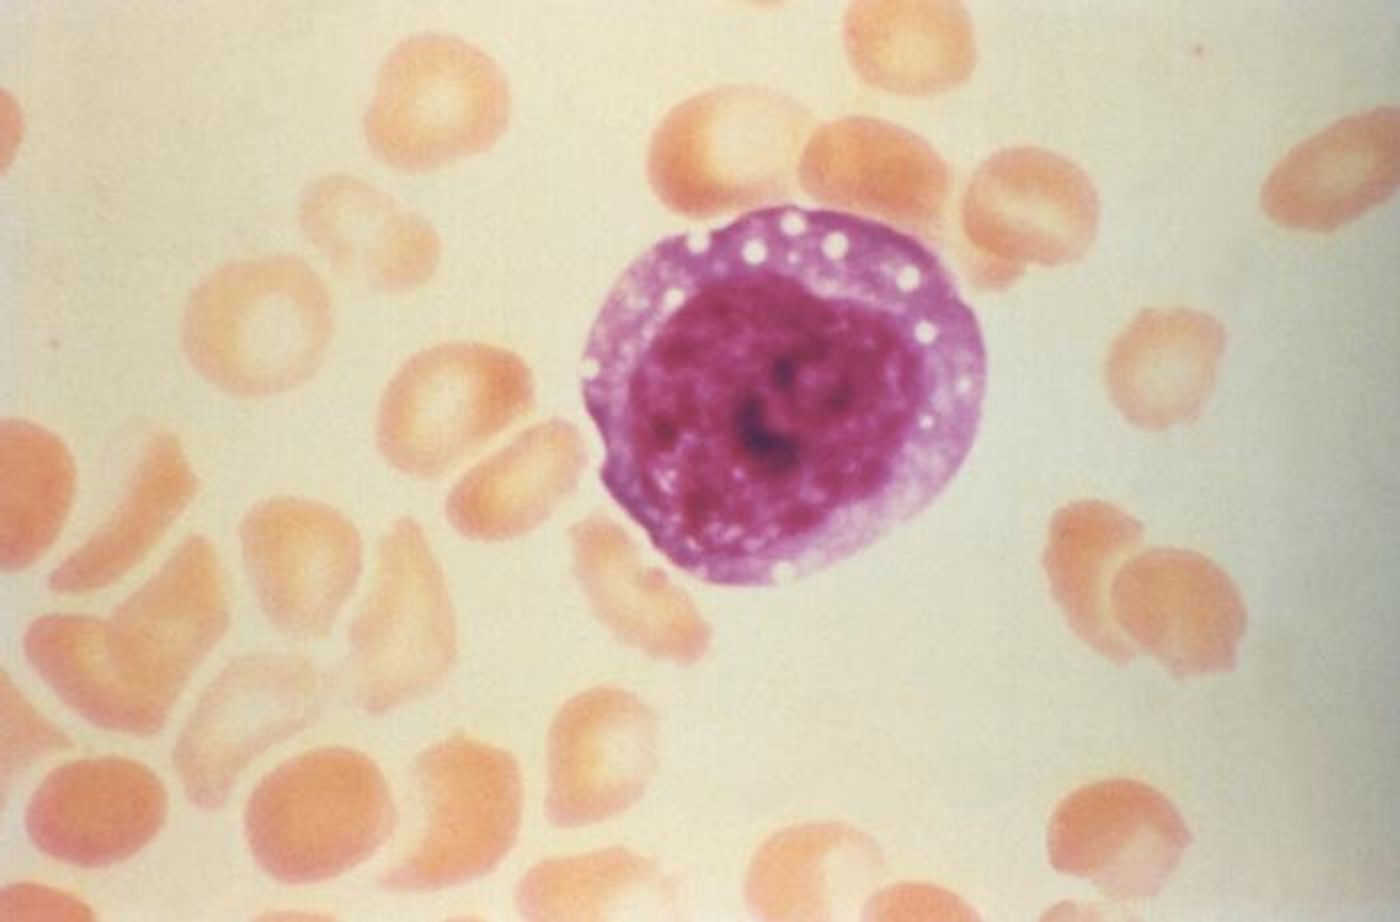 This micrograph depicts an atypical, enlarged lymphocyte found in the blood smear from a hantavirus pulmonary syndrome (HPS) patient. Hematologic findings are important in HPS. / Credit: CDC